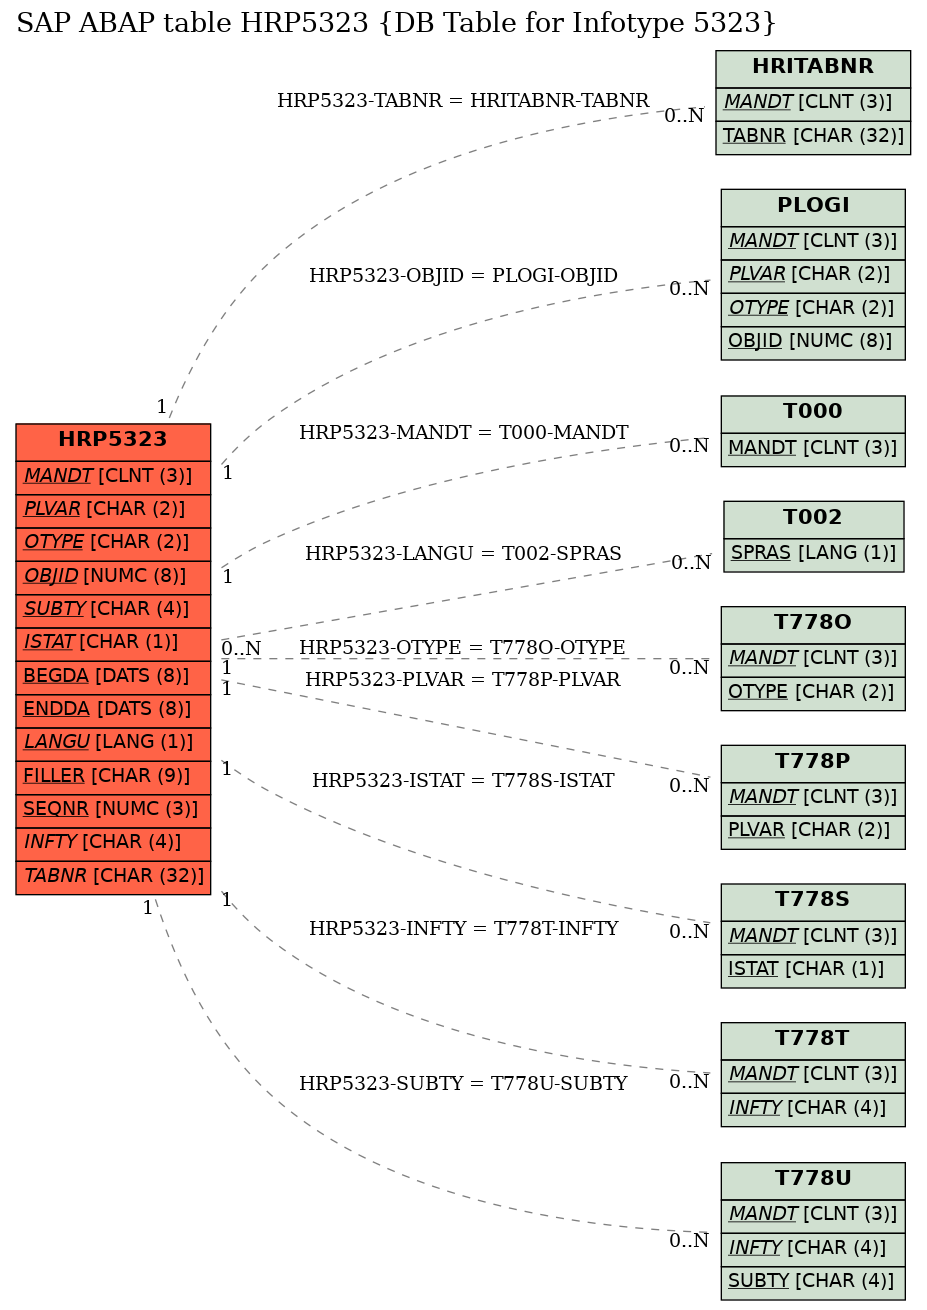 E-R Diagram for table HRP5323 (DB Table for Infotype 5323)